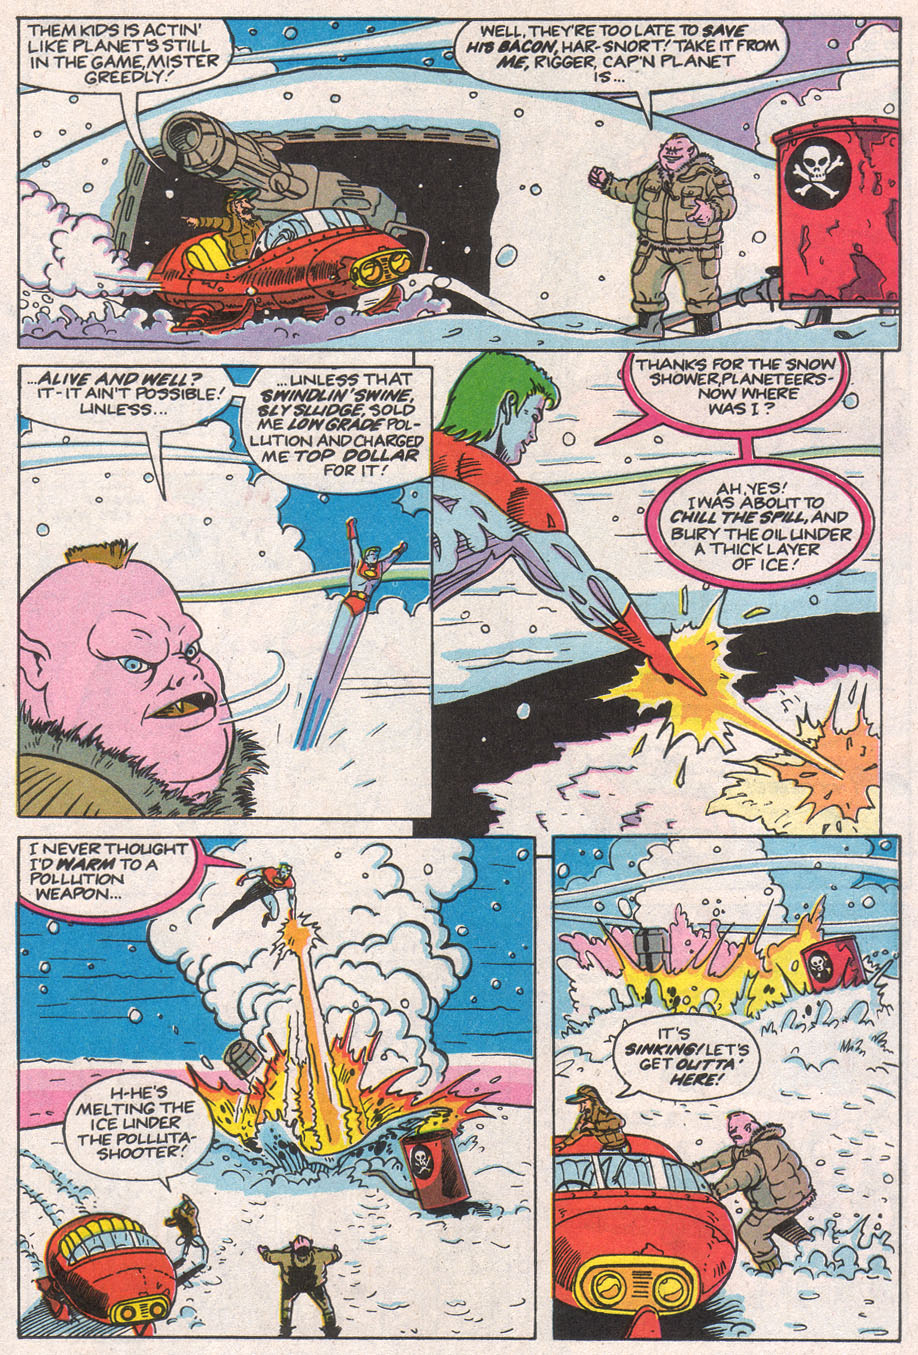 Captain Planet and the Planeteers 11 Page 19